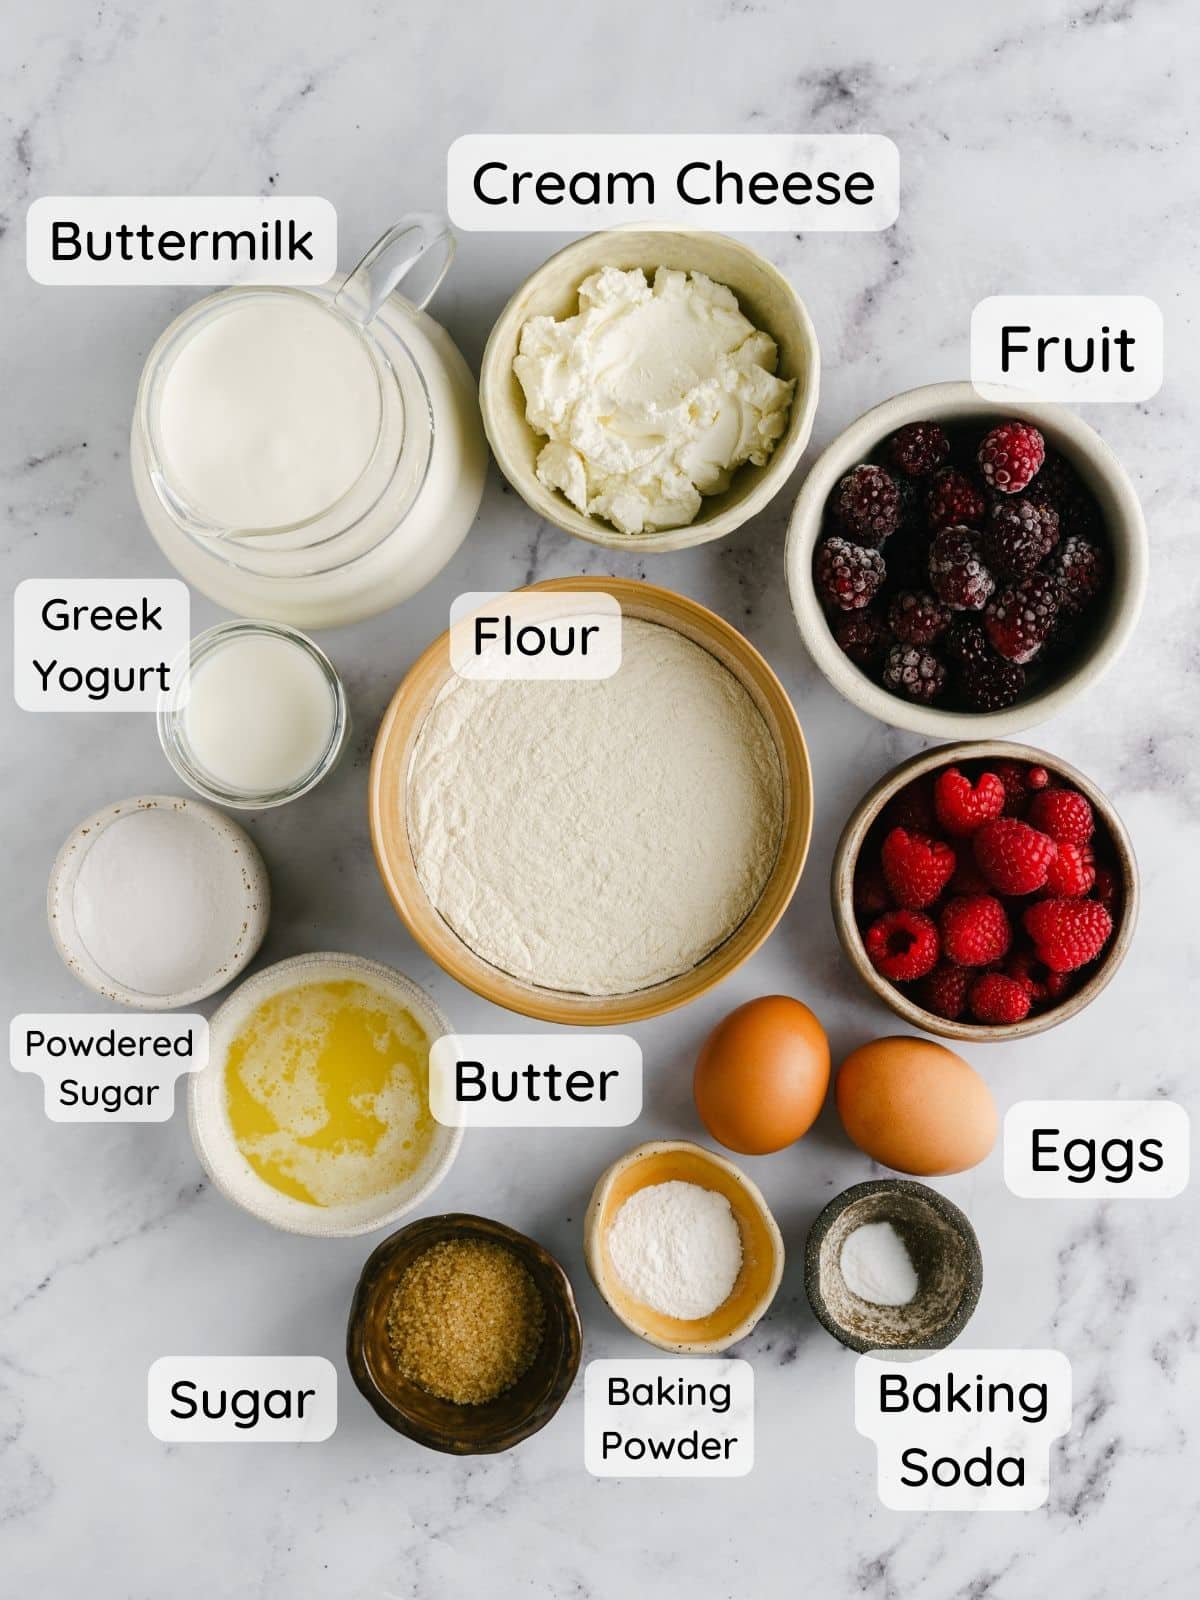 The pancake recipe ingredients on a table, with the text overlay "buttermilk, eggs, flour, sugar, baking powder, baking soda, melted butter, cream cheese, greek yogurt, powdered sugar, fruit."